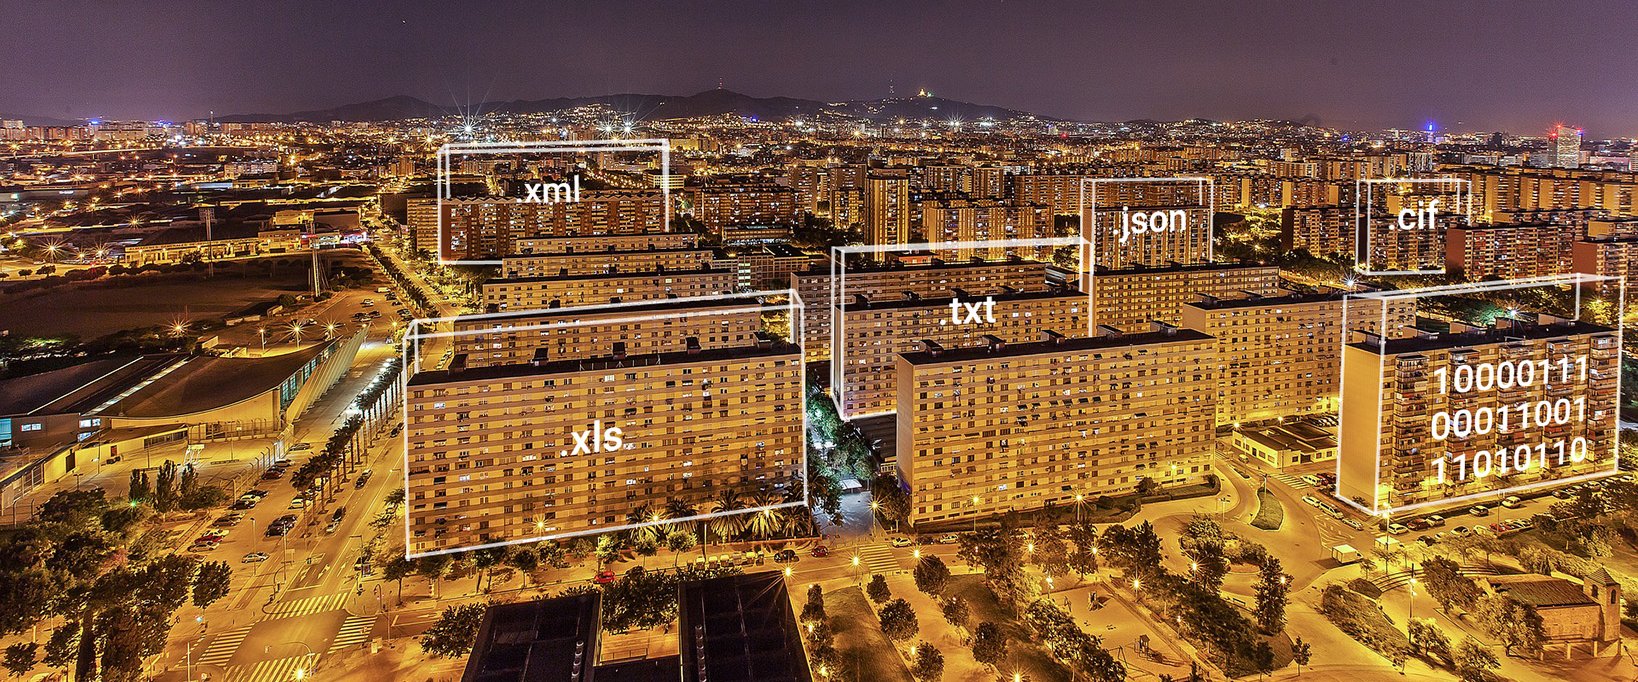 Shows buildings by night stilized as data silos.